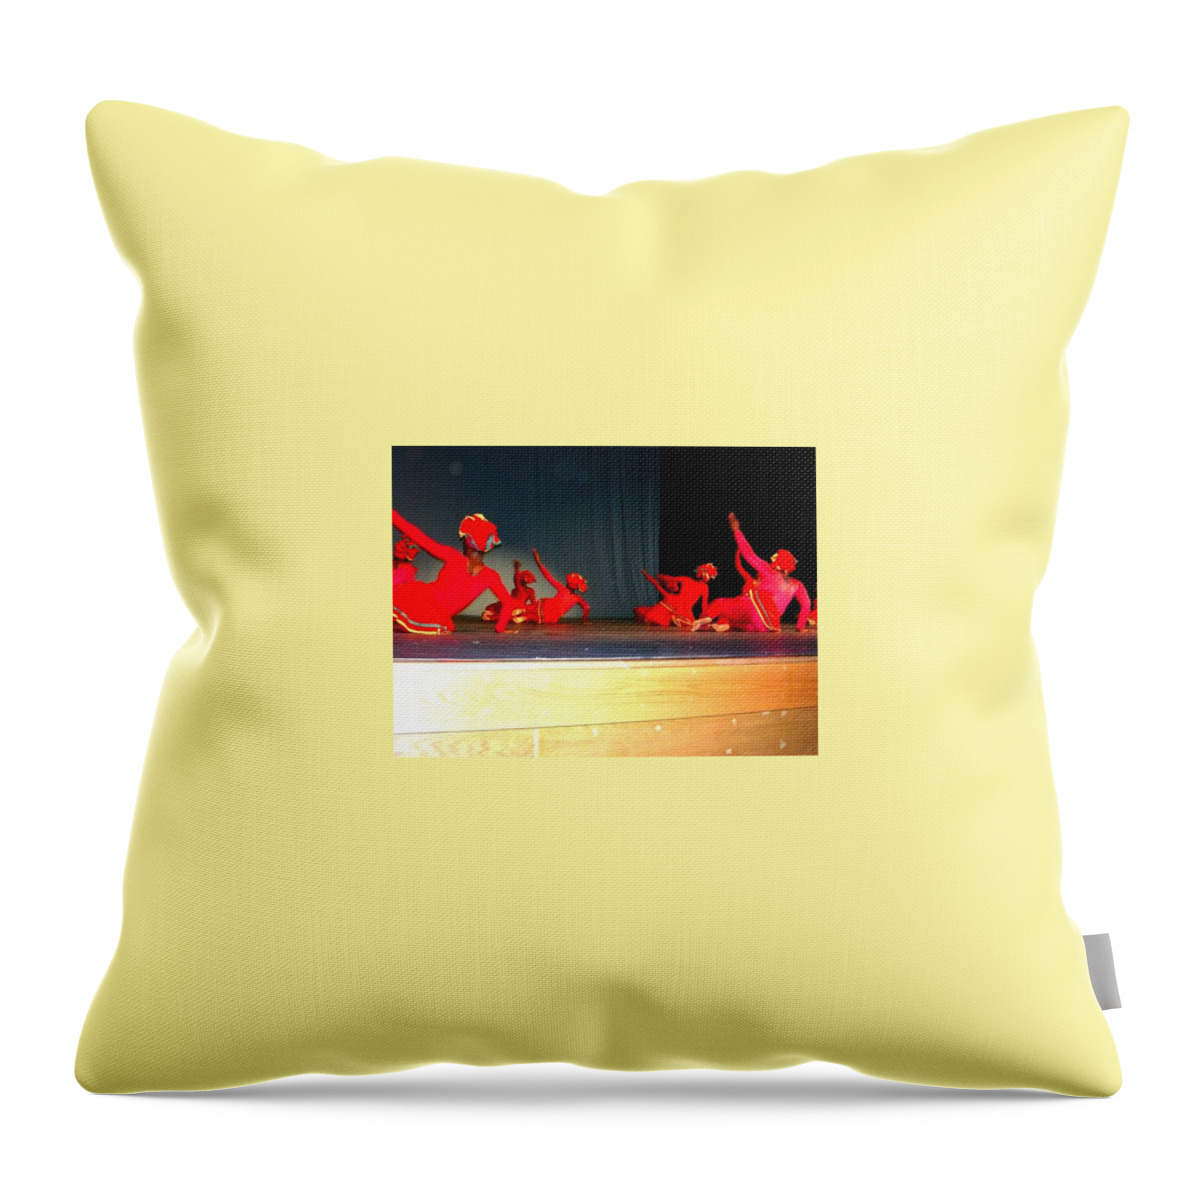  Throw Pillow featuring the photograph Tivoli Dance Troupe by Trevor A Smith